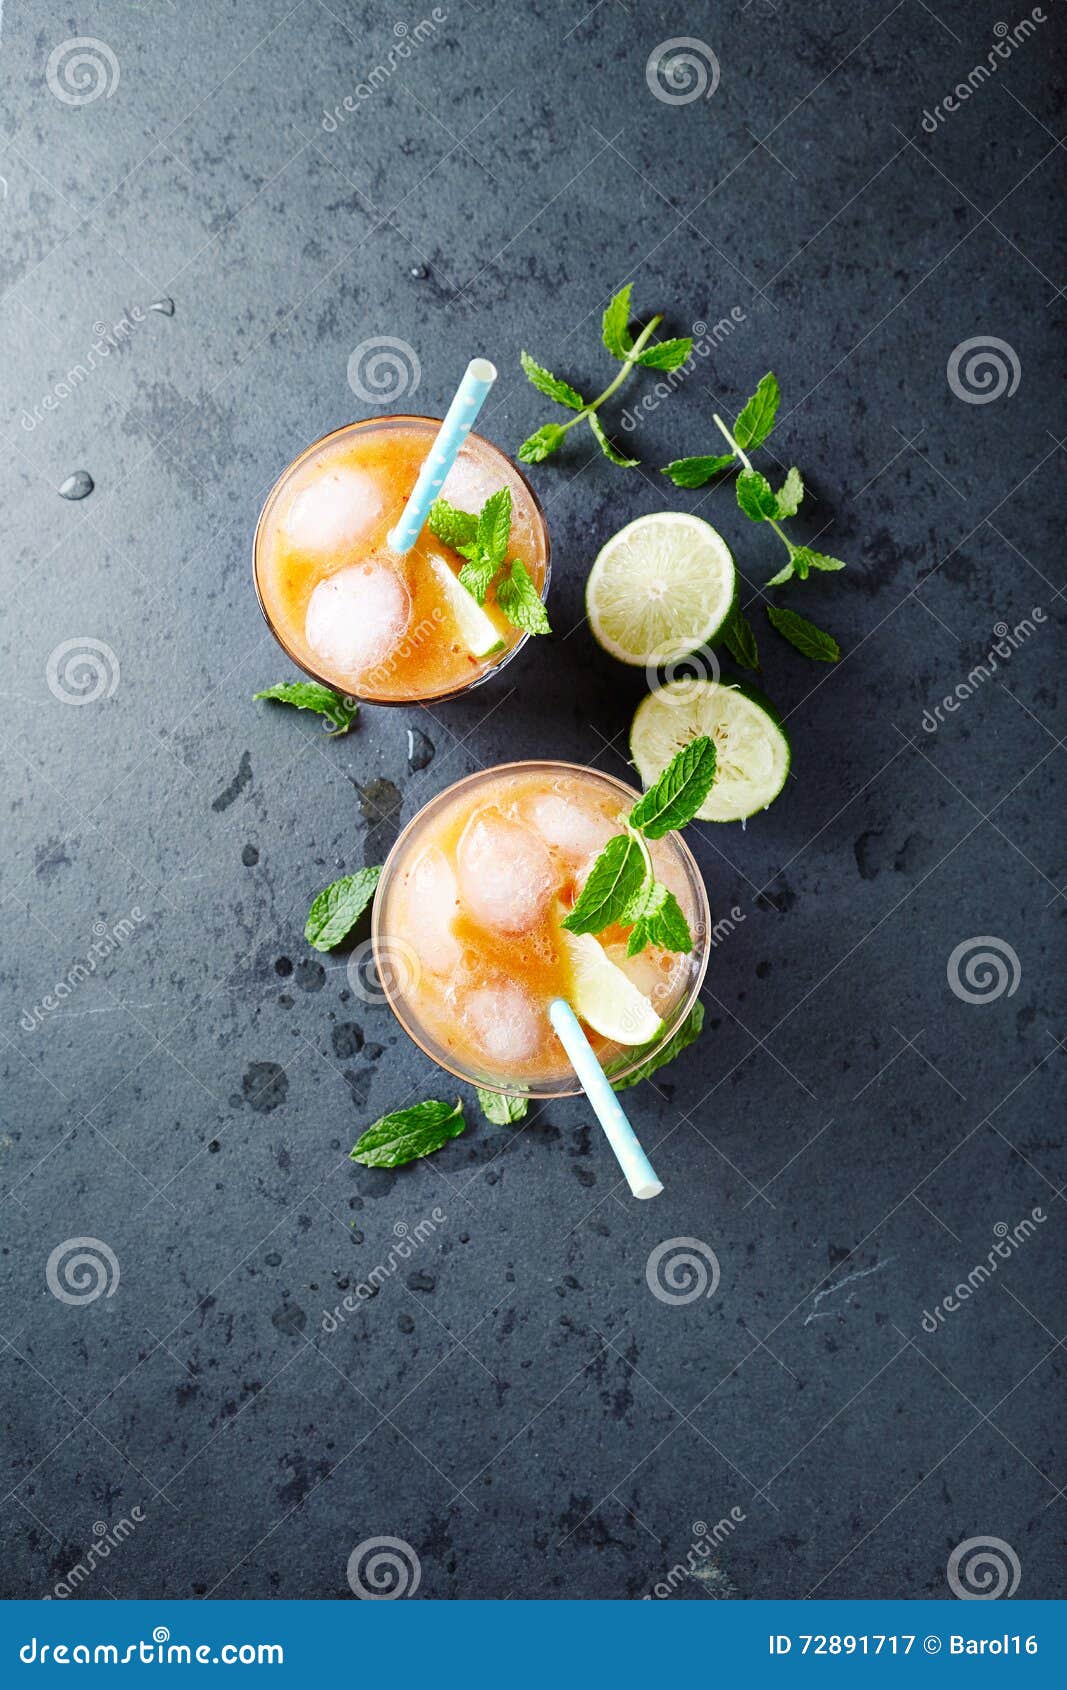 peach aqua fresca with lime juice and mint leaves